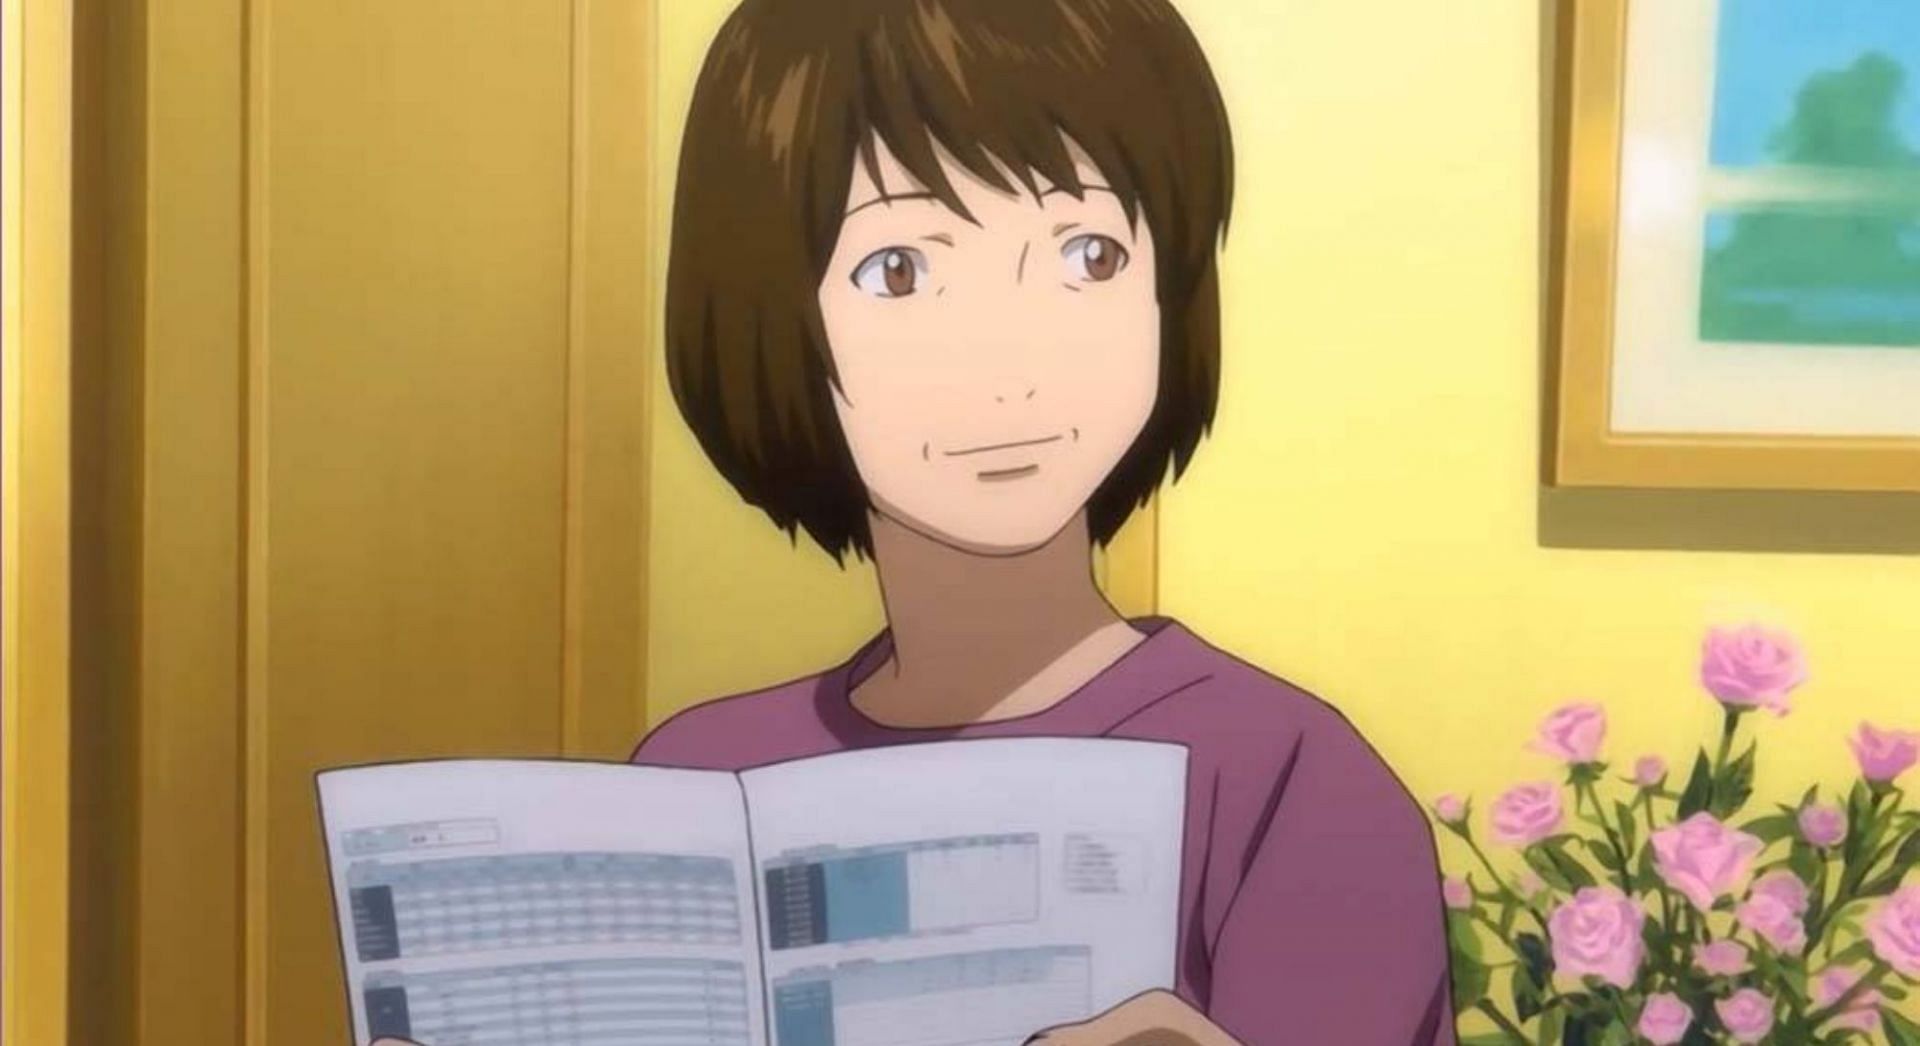 Sachiko Yagami, as seen in Death Note (Image via Studio Madhouse)